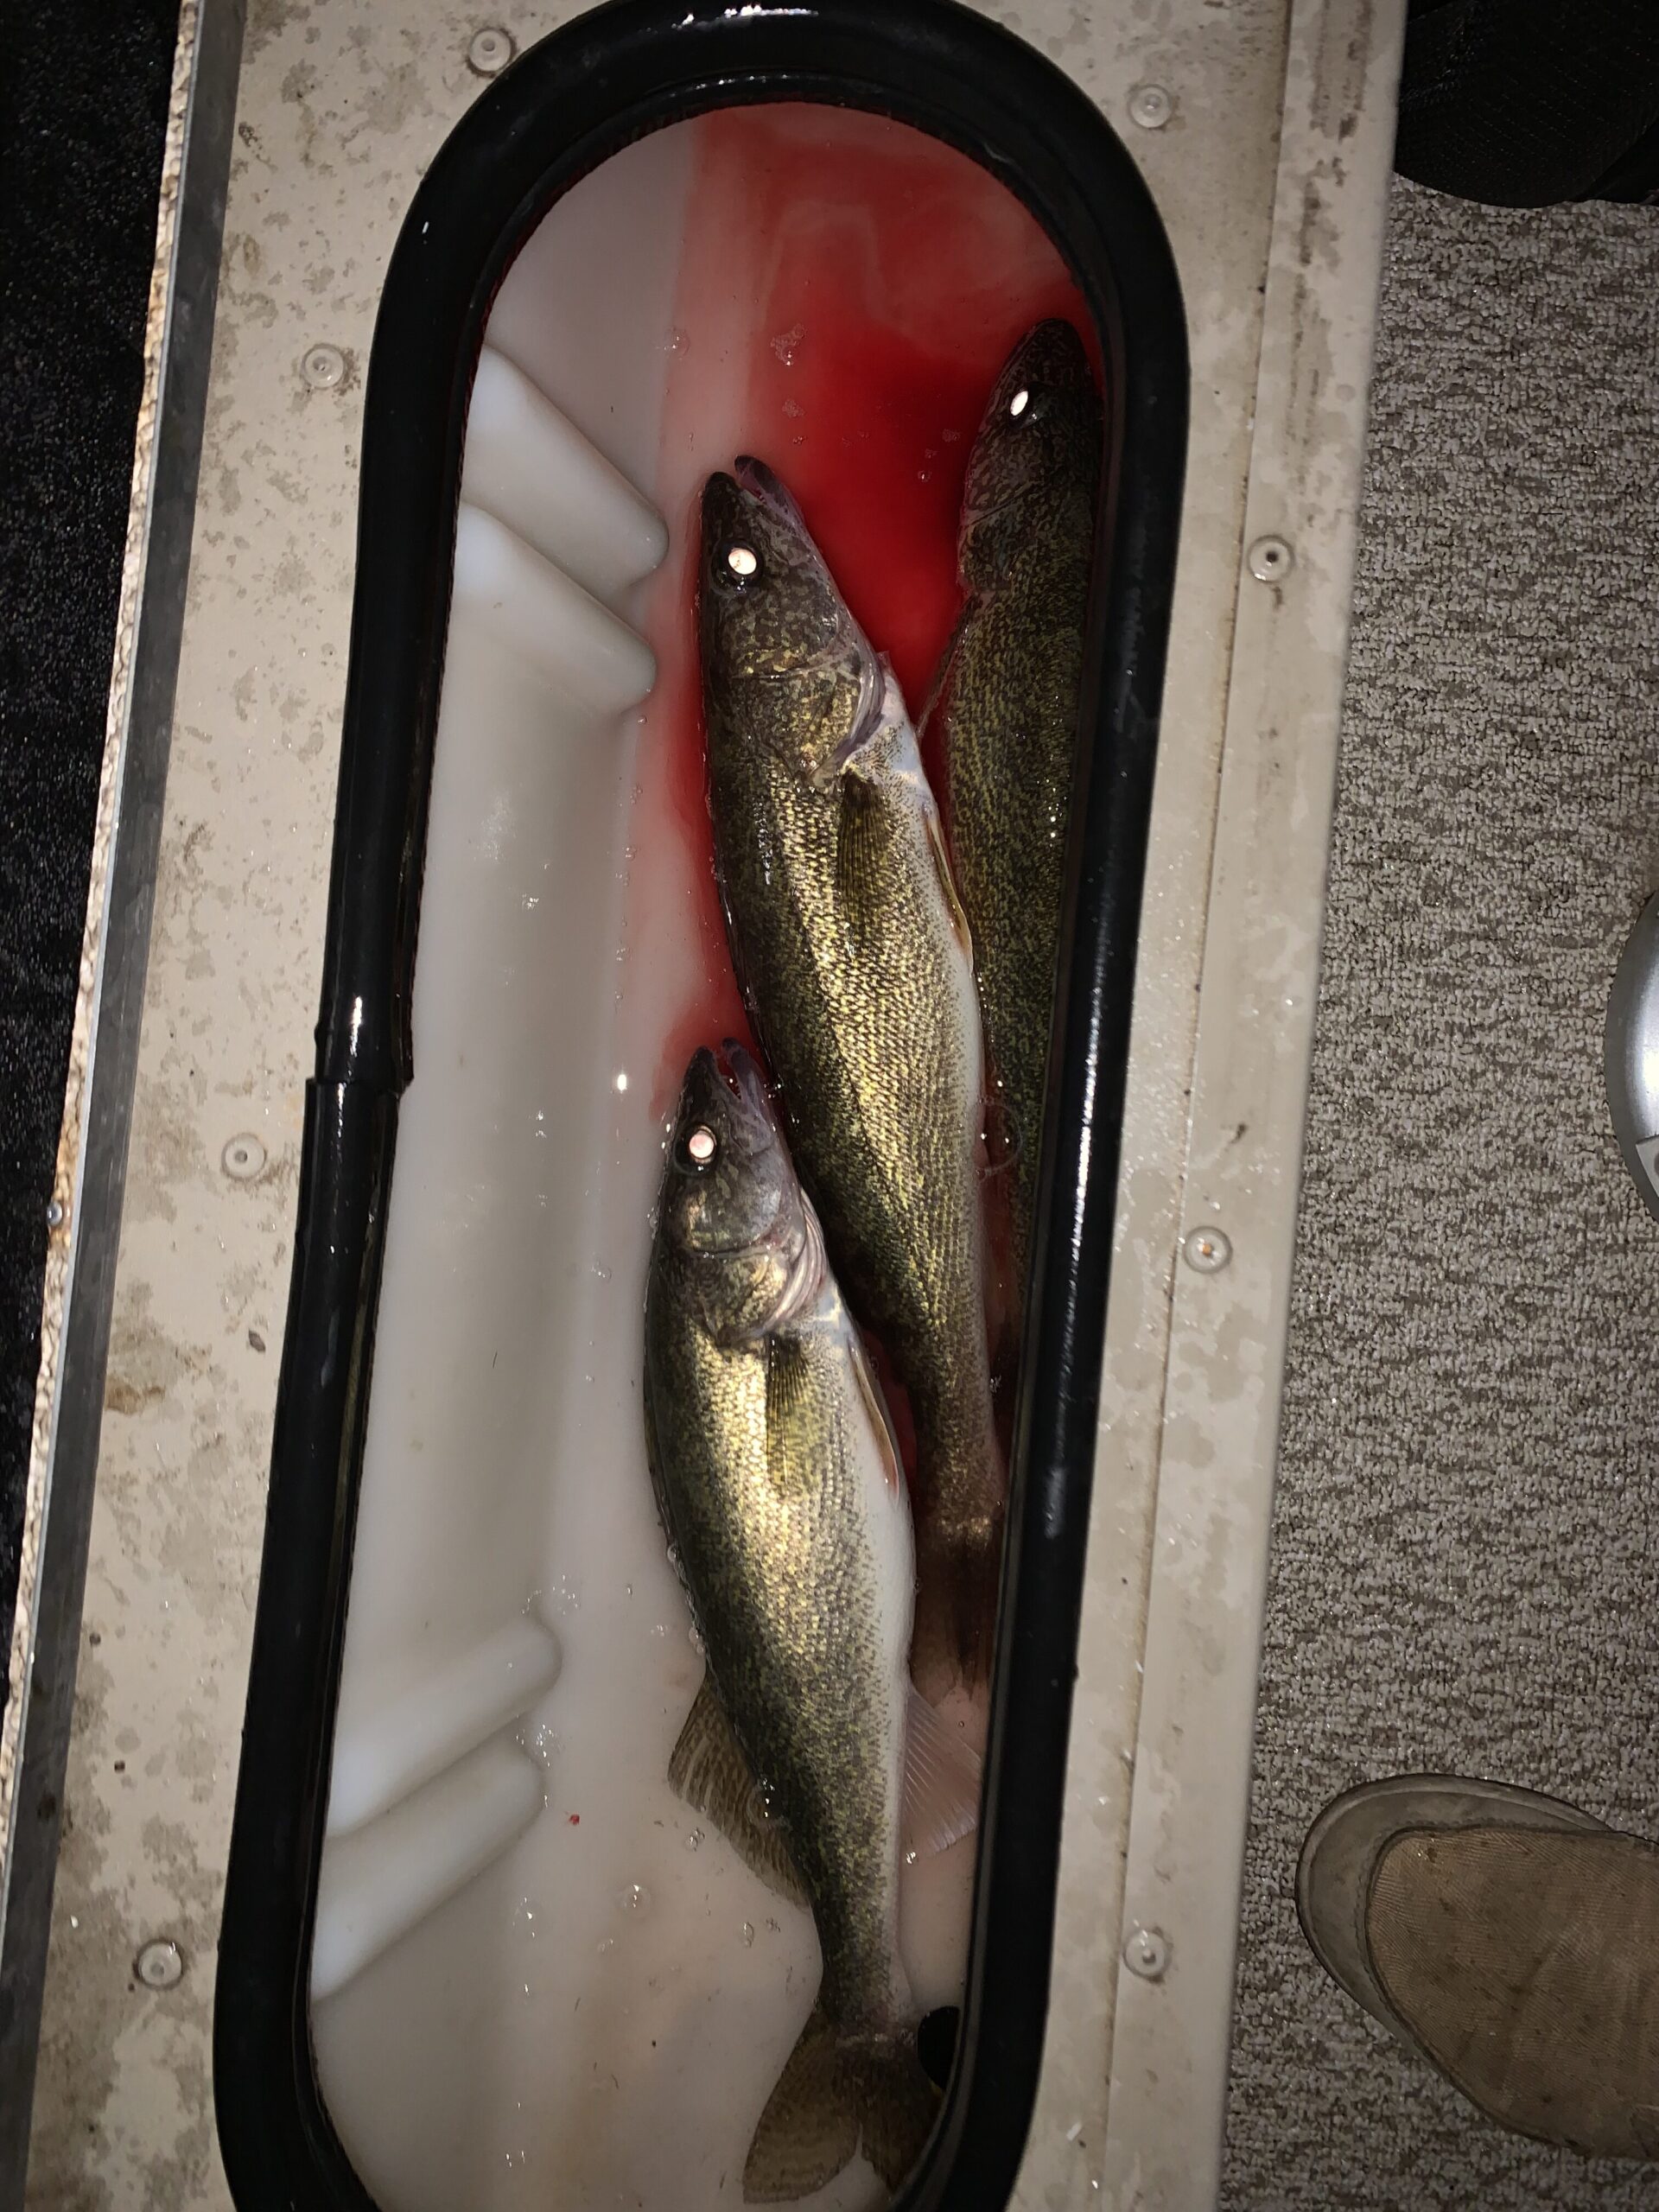 Walleye baskets - General Discussion Forum - General Discussion